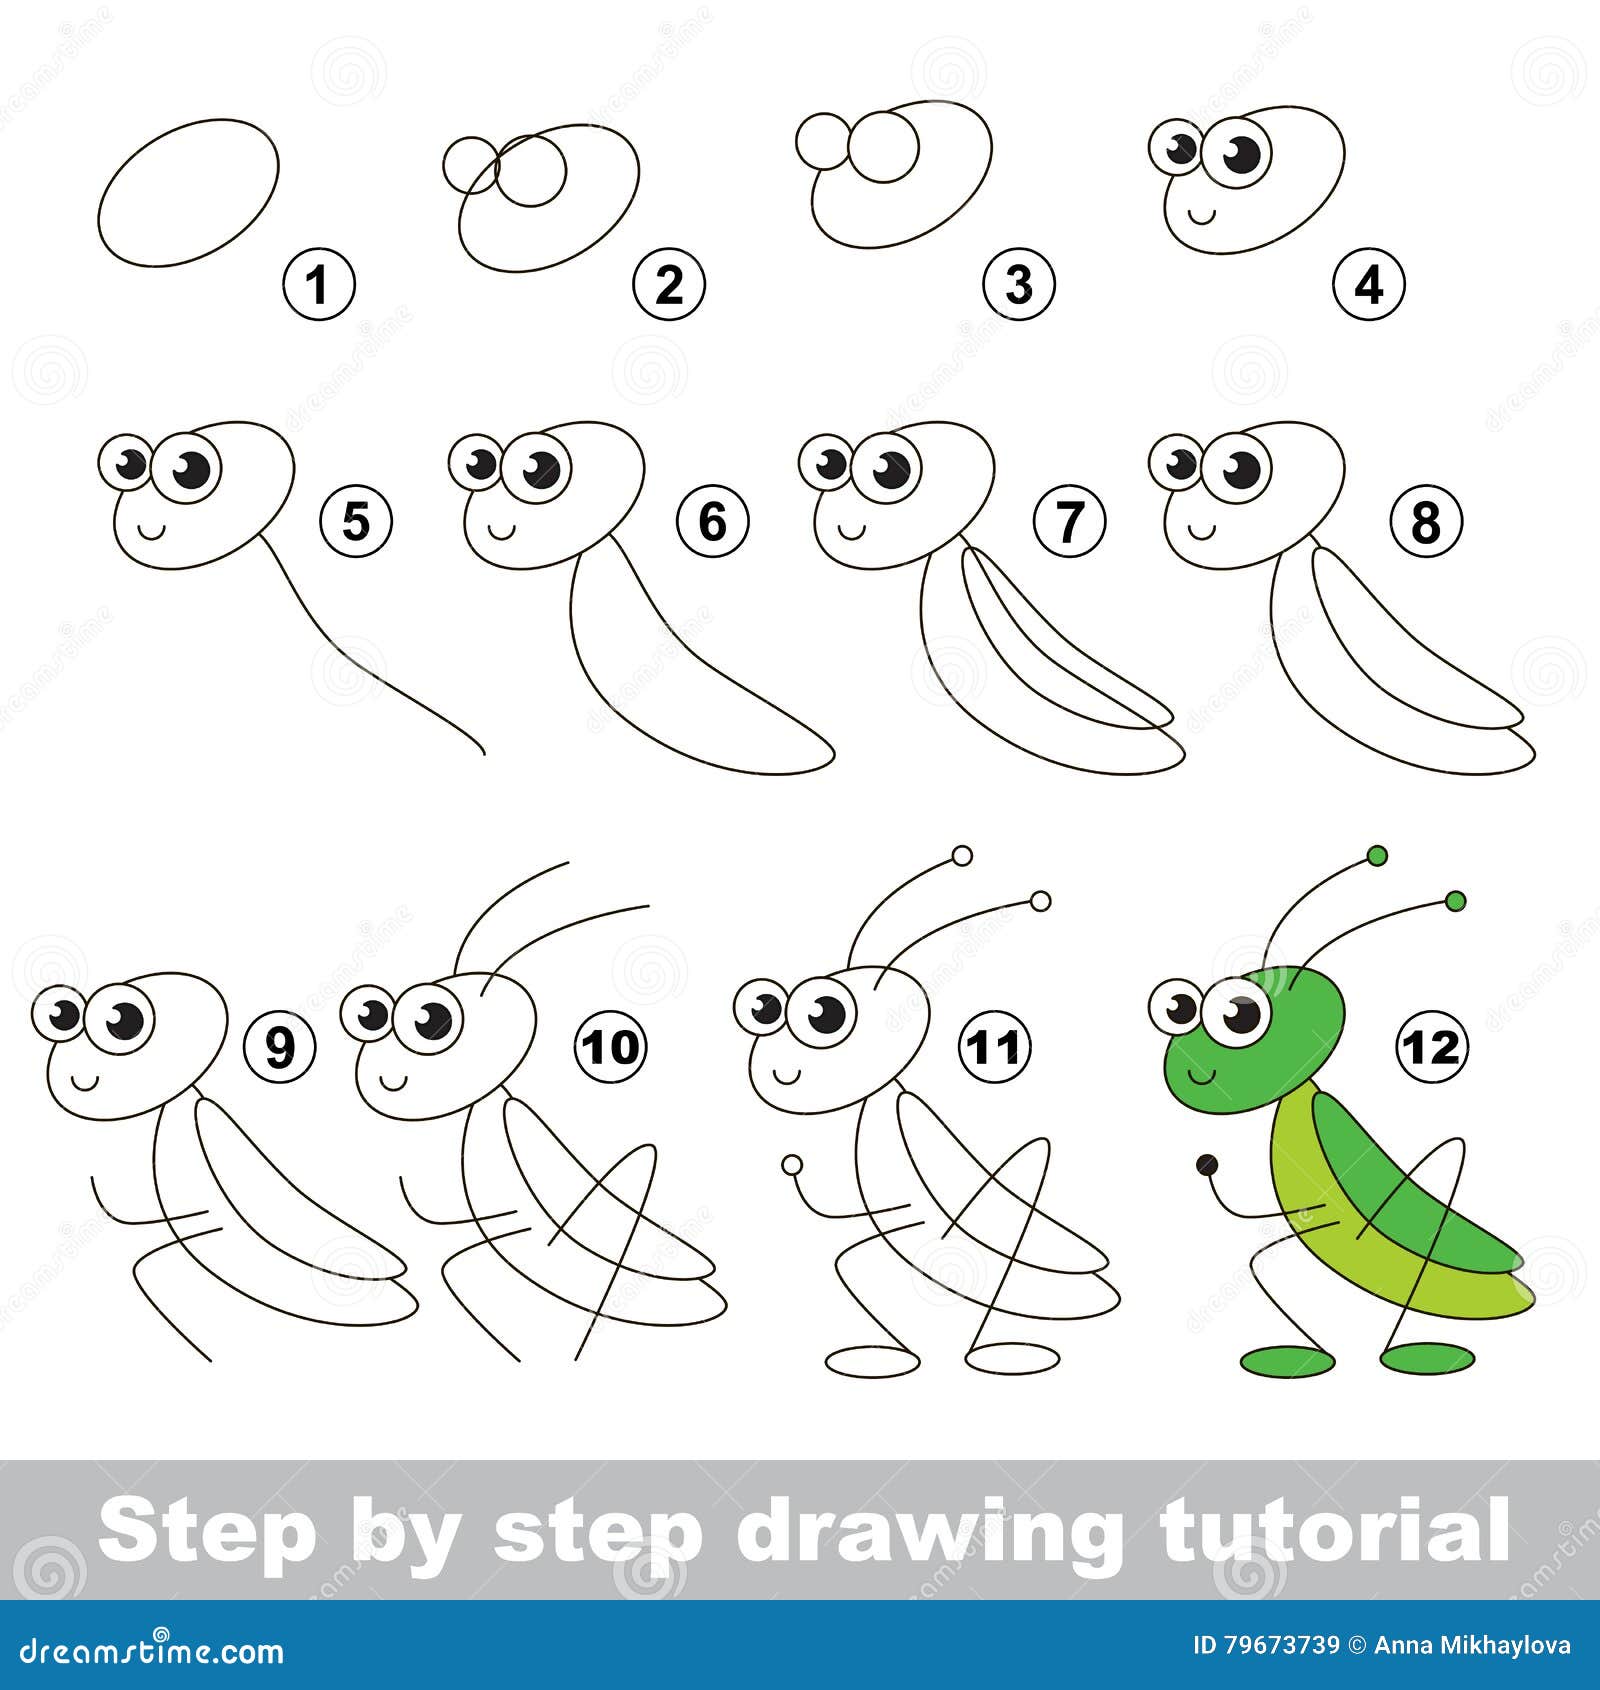 Cartoon Grasshopper | Free Online Coloring Page